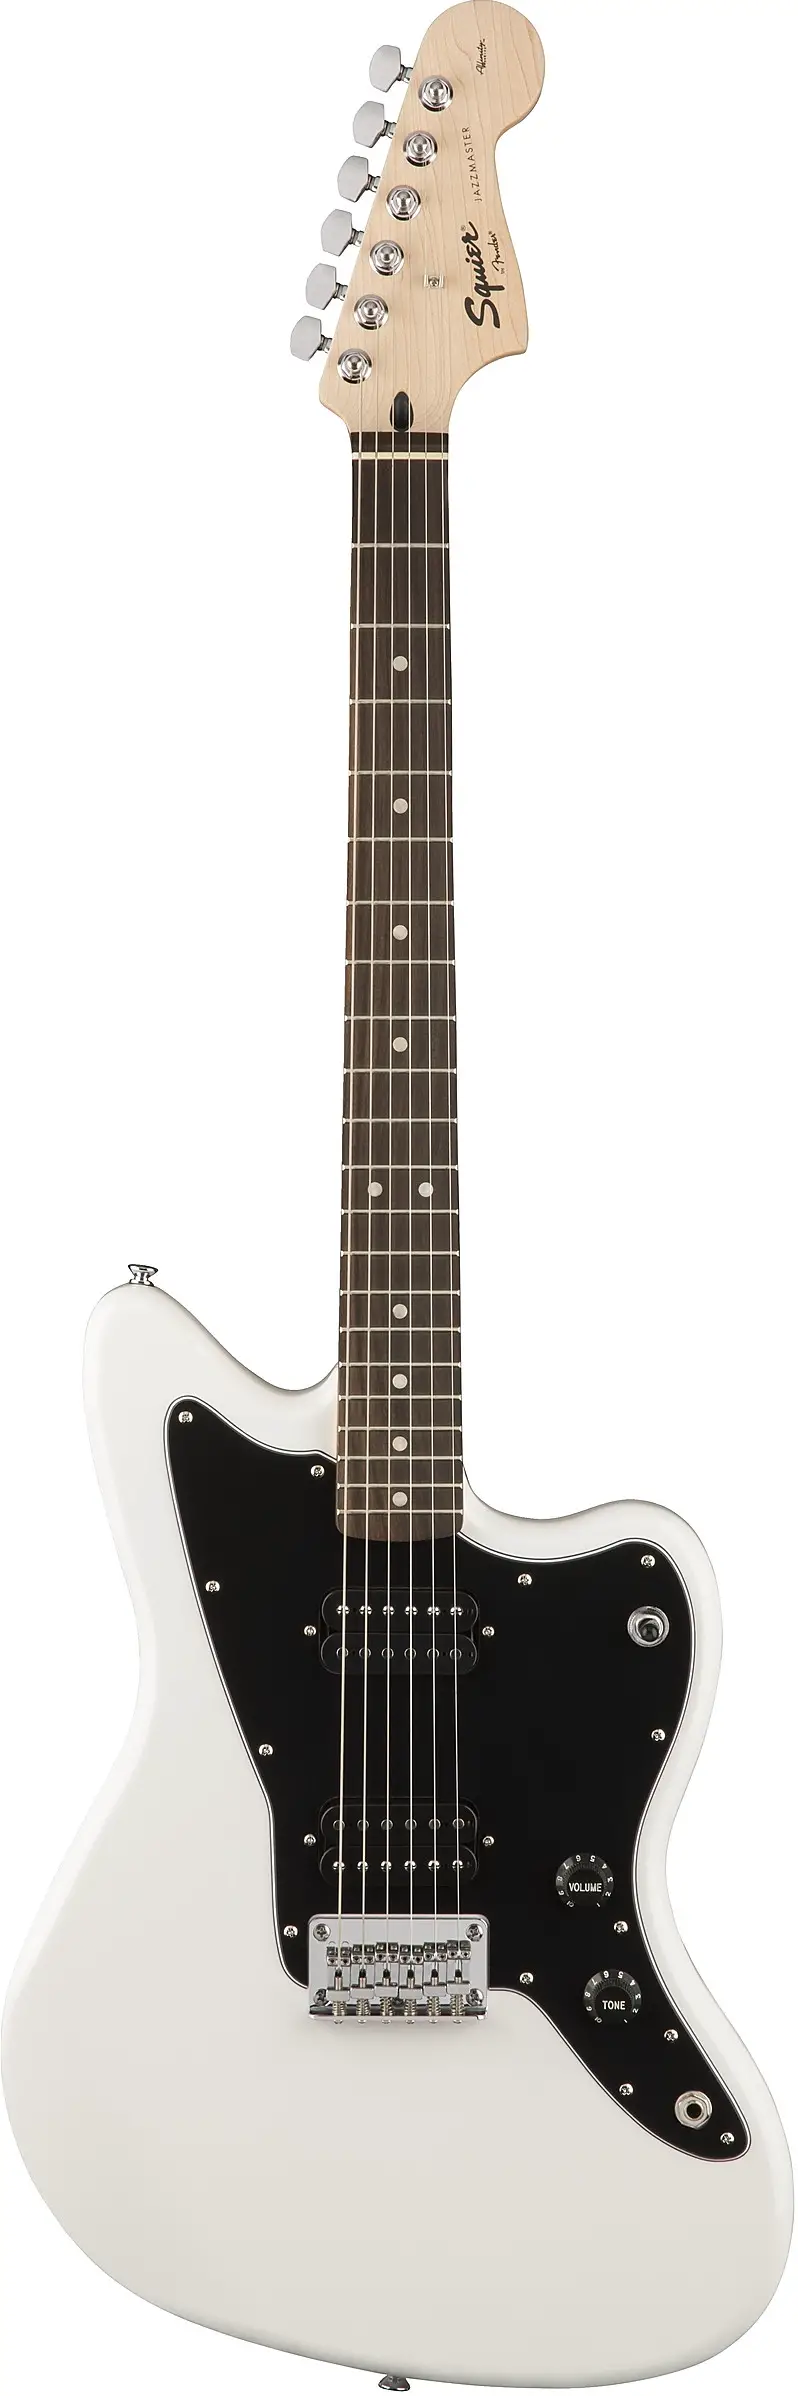 Affinity Jazzmaster HH by Squier by Fender